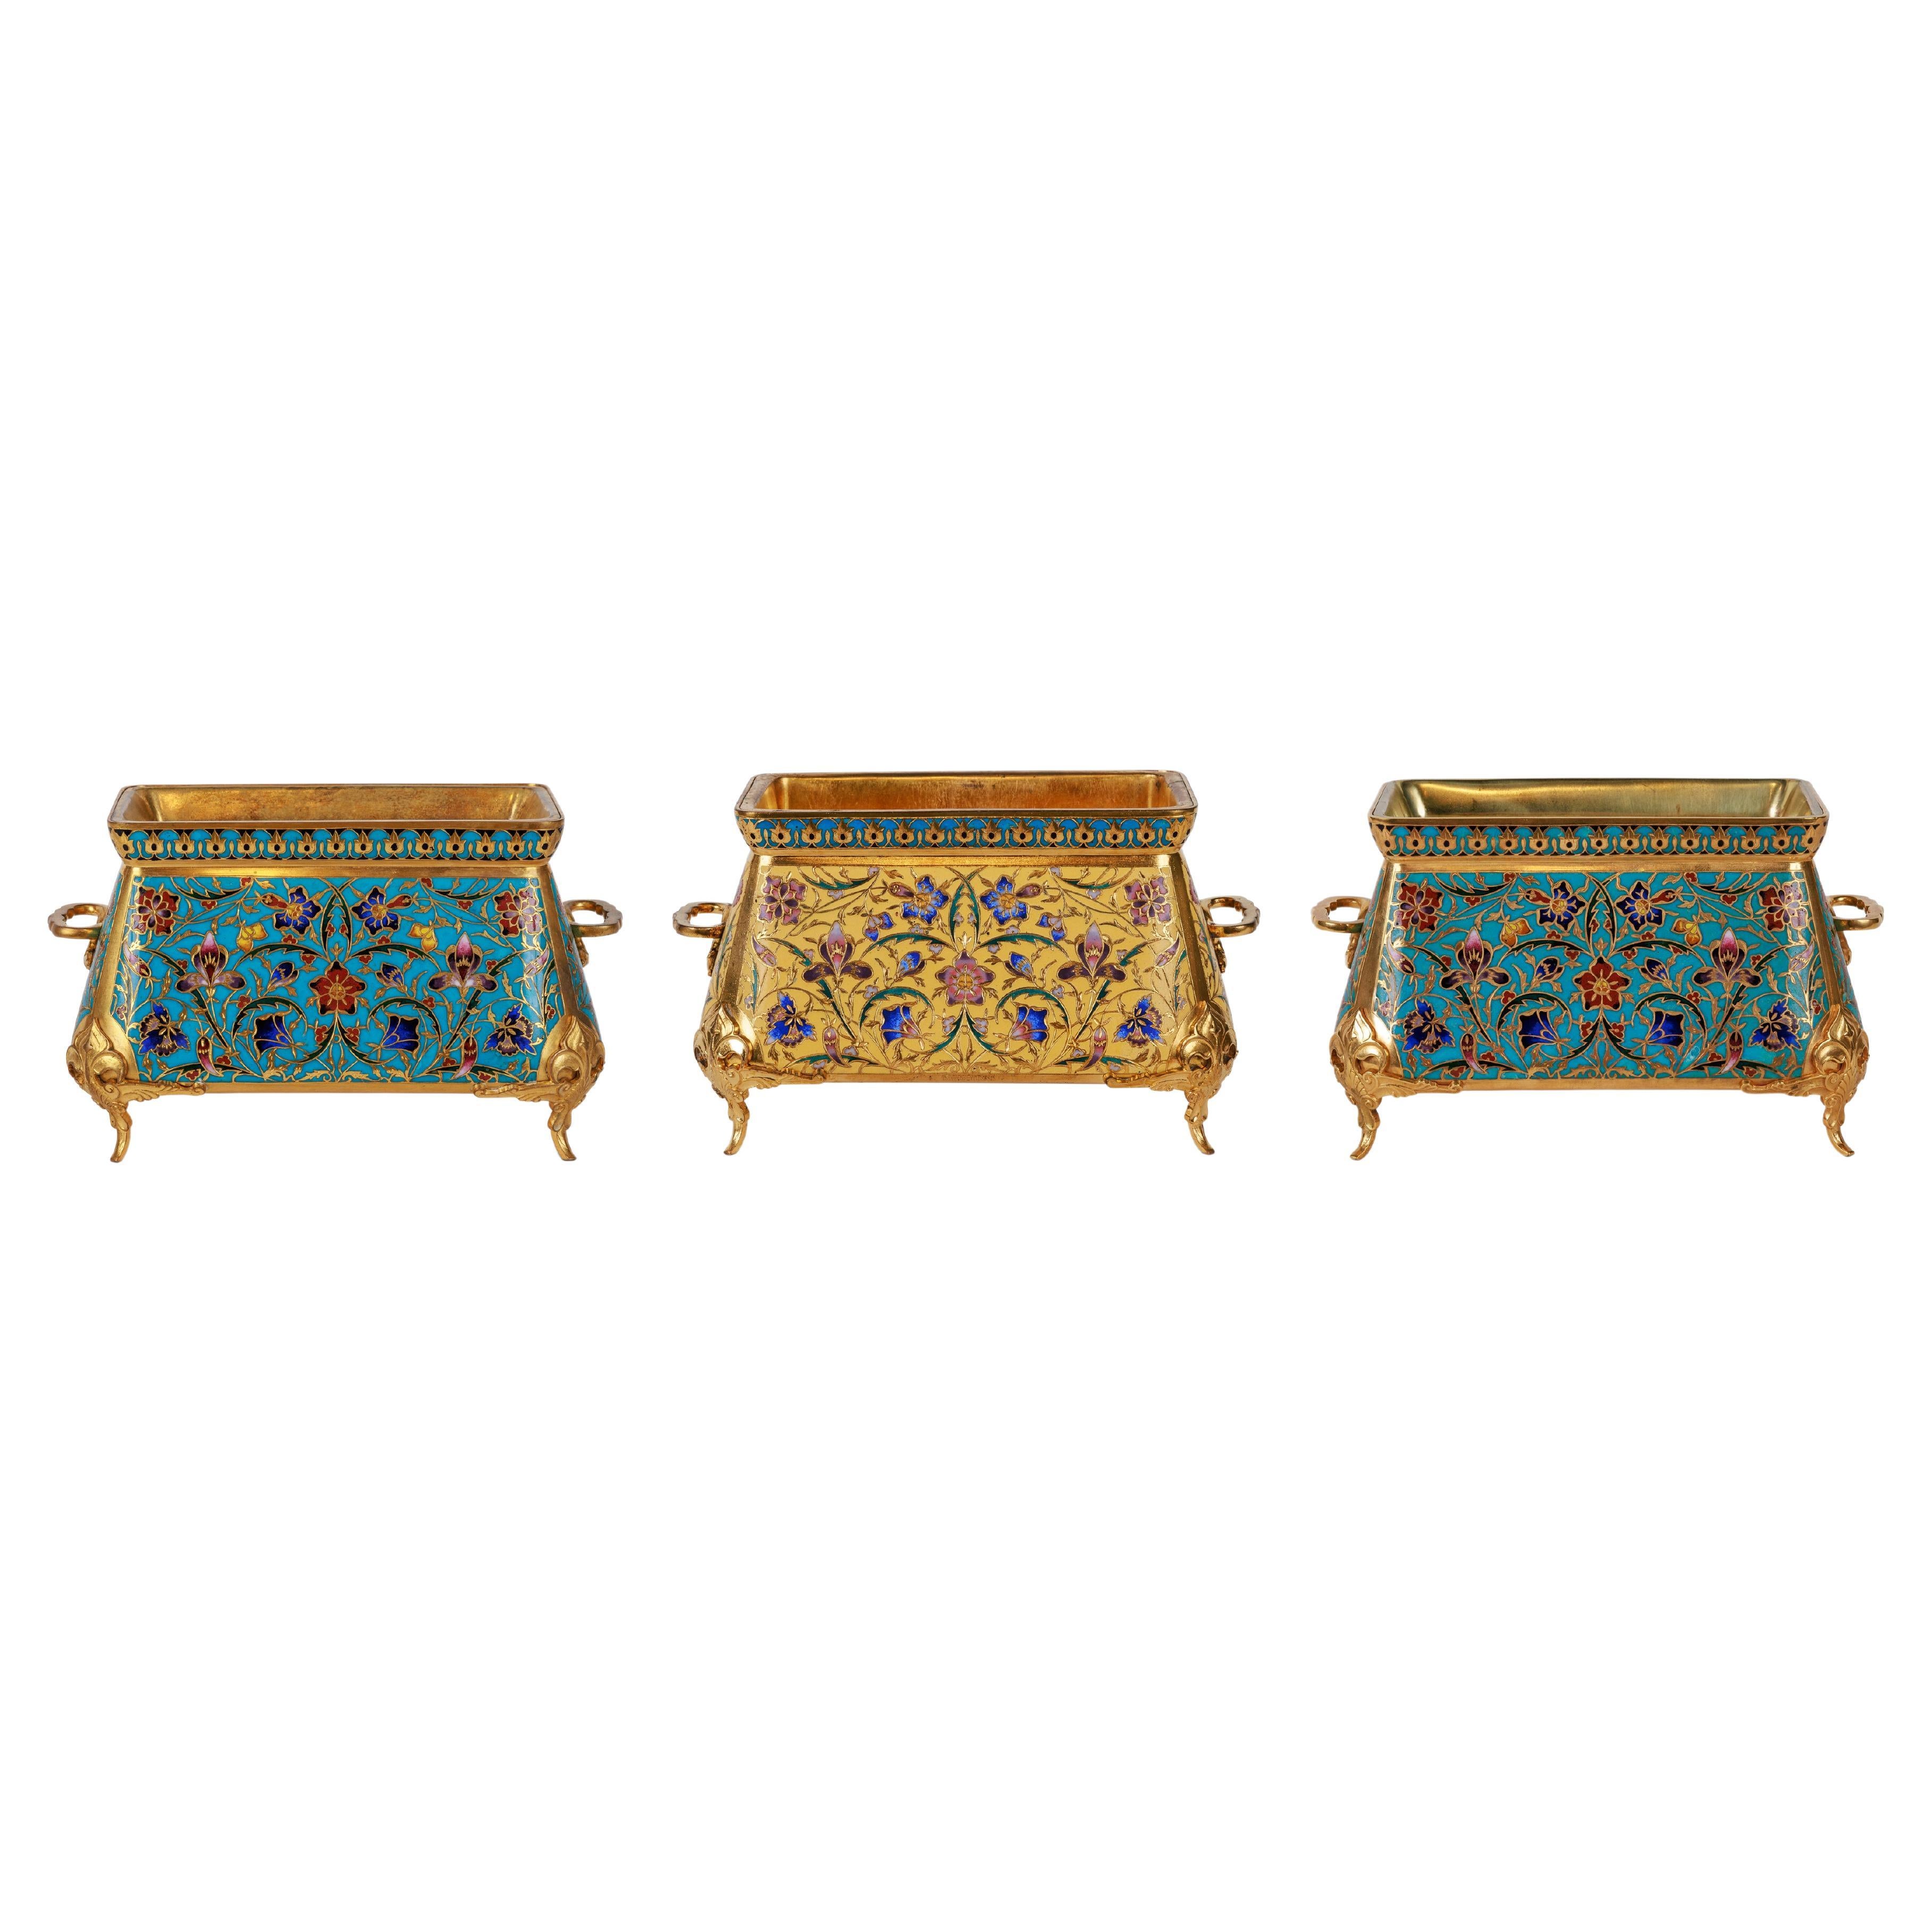 F. Barbedienne, A Suite of Three French Ormolu and Champleve Enamel Jardinieres  im Angebot